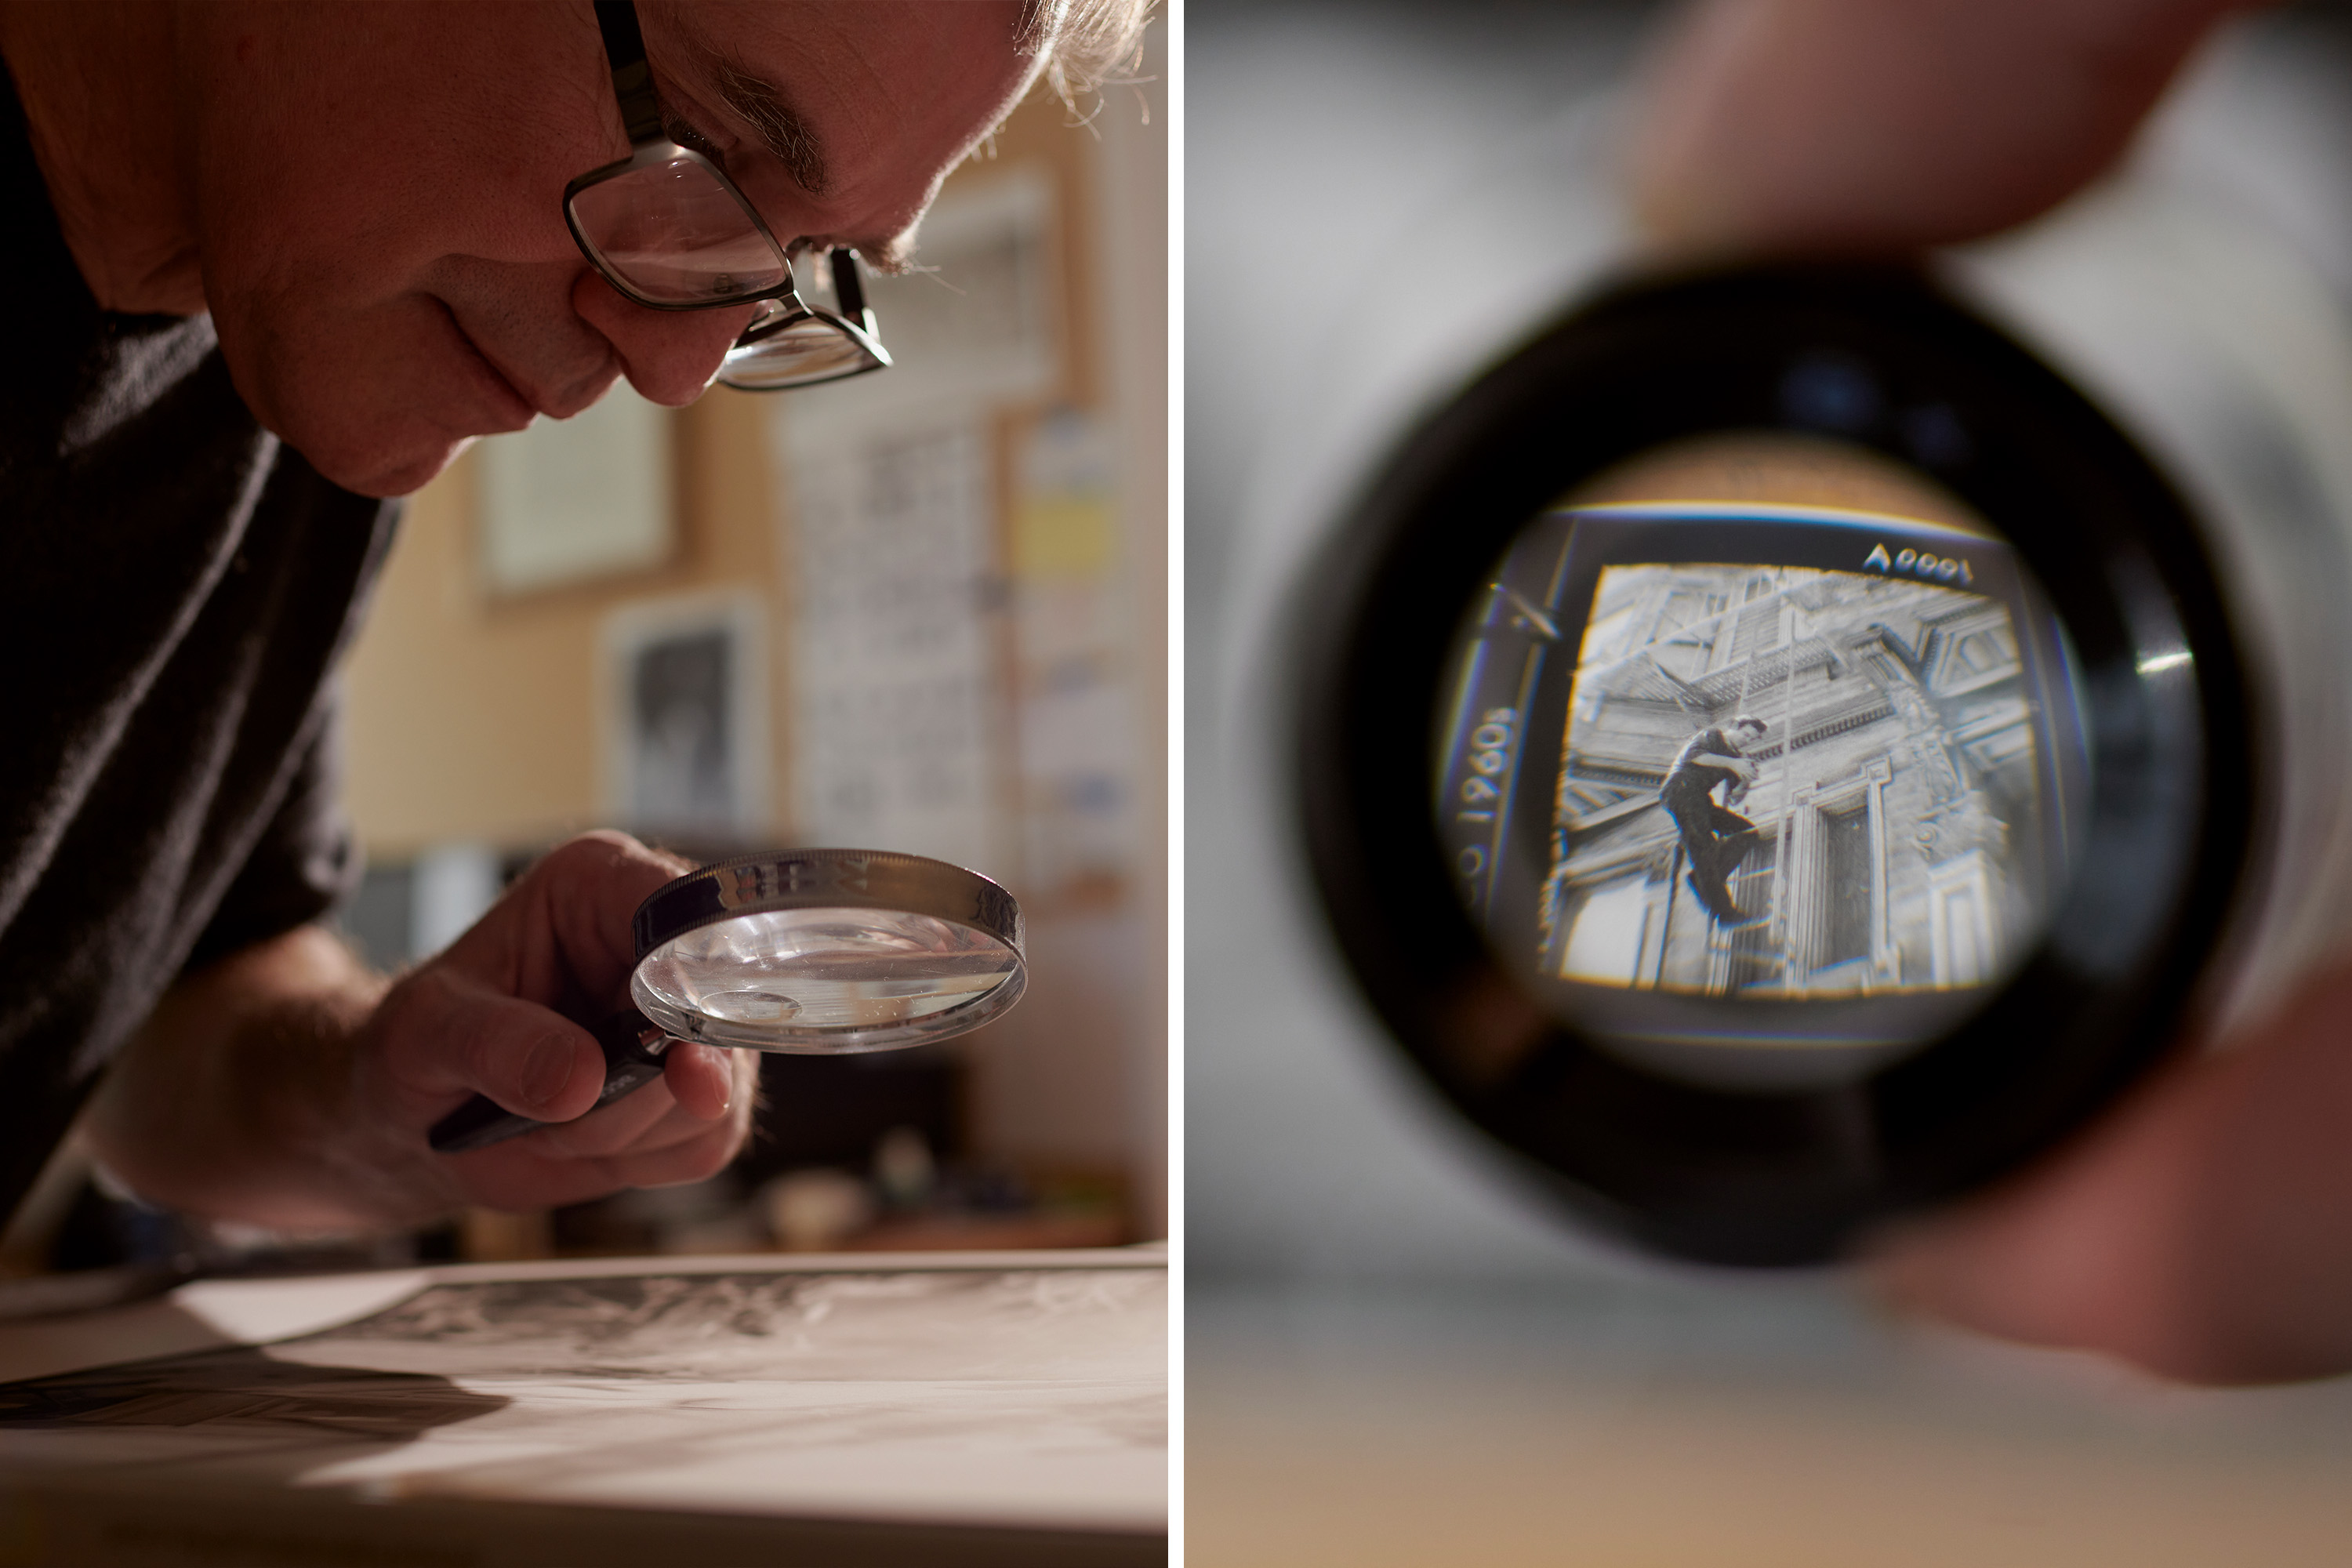 A person examines artwork closely with a magnifying glass; the other image shows a view through a camera lens of a photo.